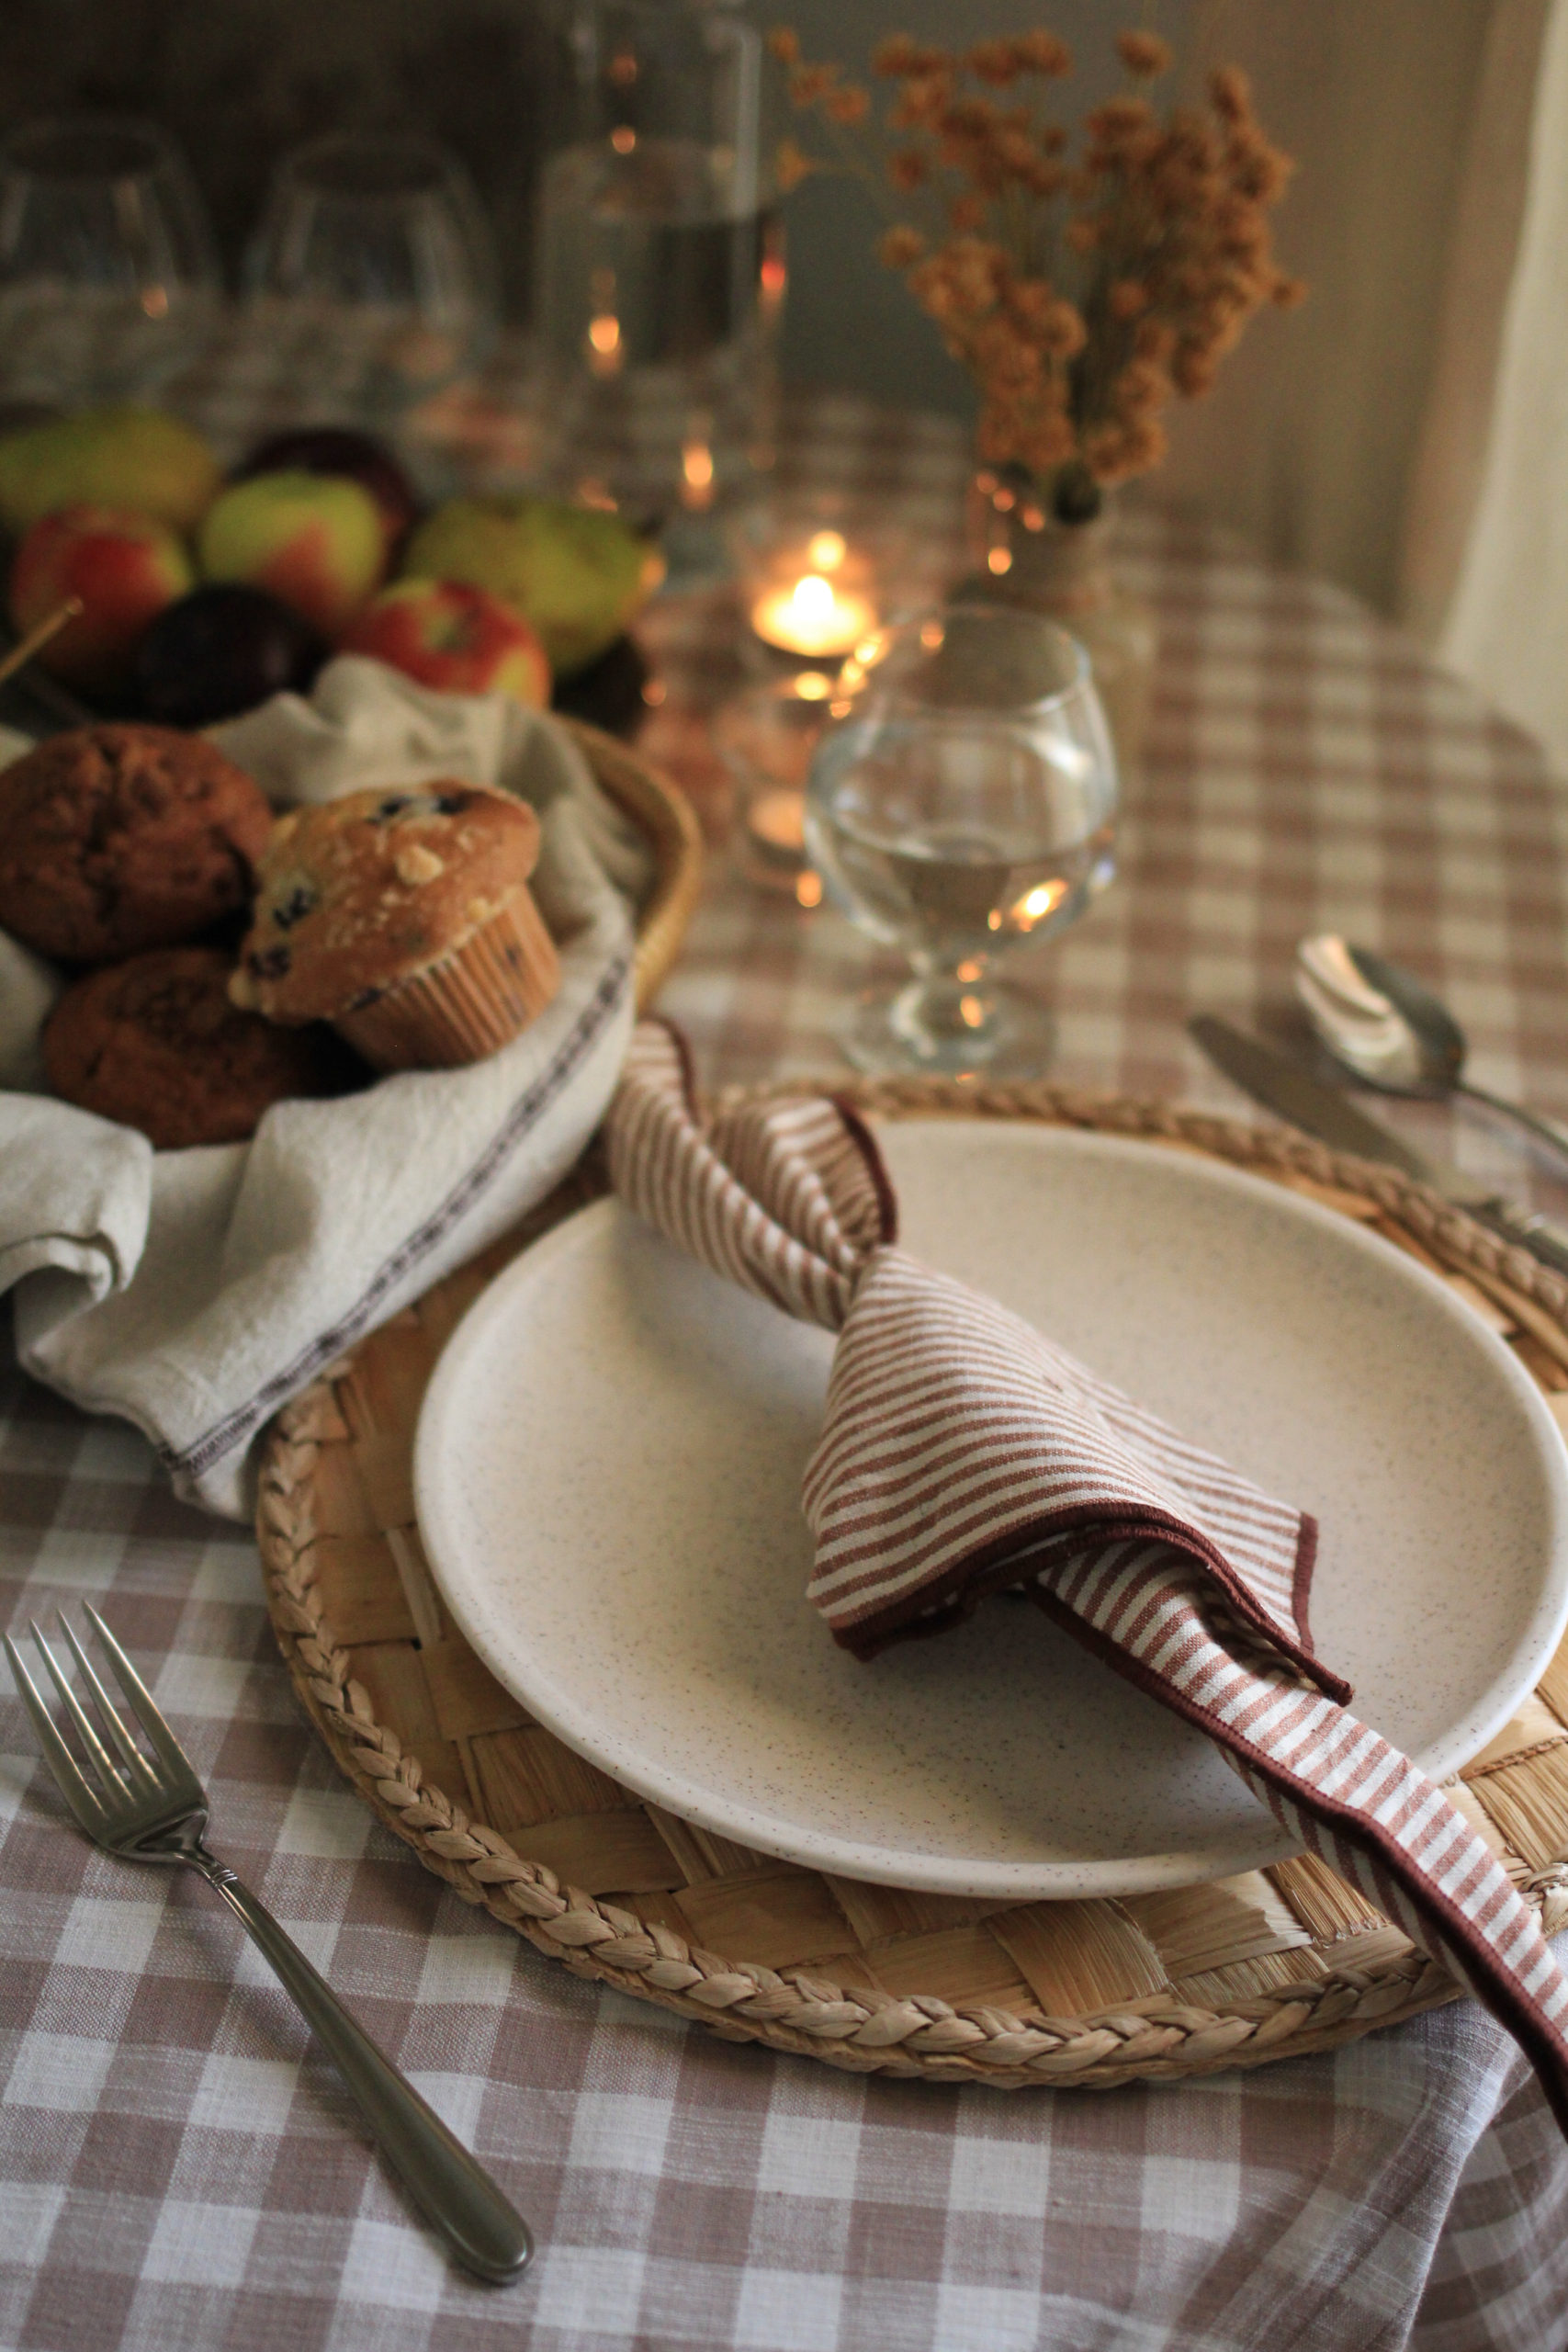 Table setting, featuring a gingham tablecloth, woven charger, speckled pottery plate, with a striped cloth napkin displayed atop the plate.  Recycled glass glasswaer, and vintage style silverware.